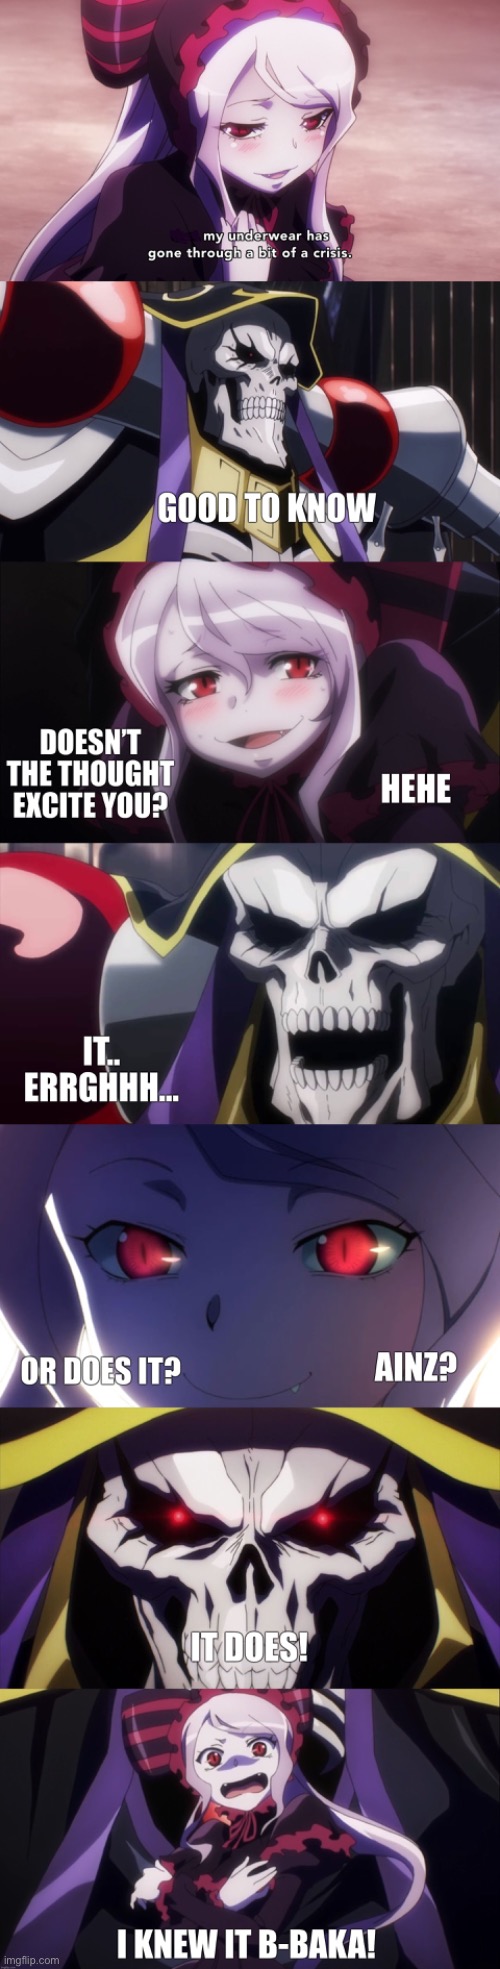 Doesn’t the thought excite you? Or does it? | image tagged in overlord,vampire | made w/ Imgflip meme maker